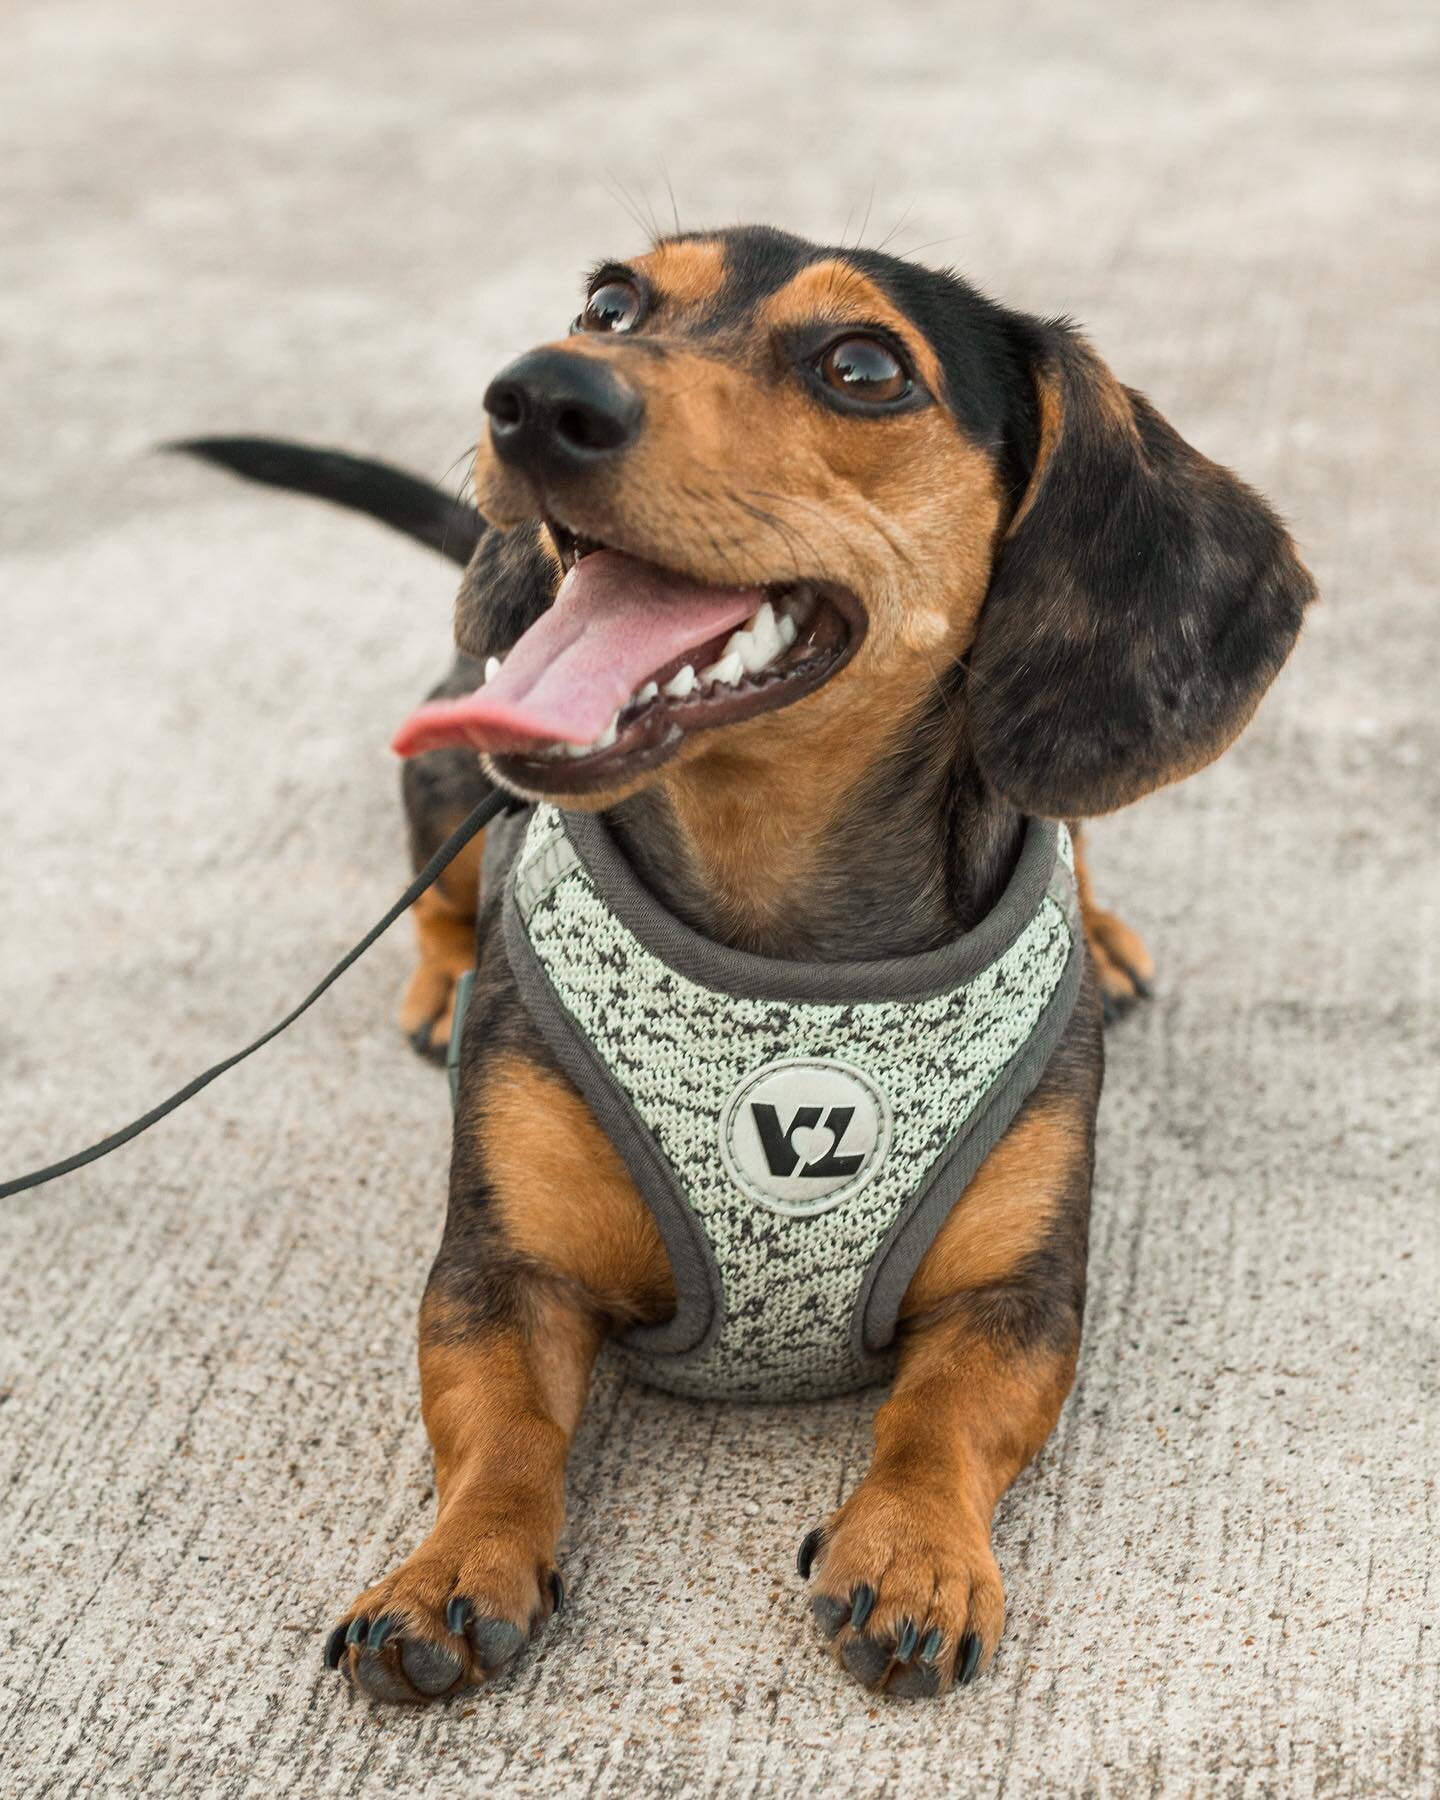 Hello! It is DACHTOBER FEST day! Make sure to come find me between the costume contest and the wiener races so I can get a picture of you and your doggo. I will be sending all pictures to @diamonddachrescue and will also upload pictures to a blog pos